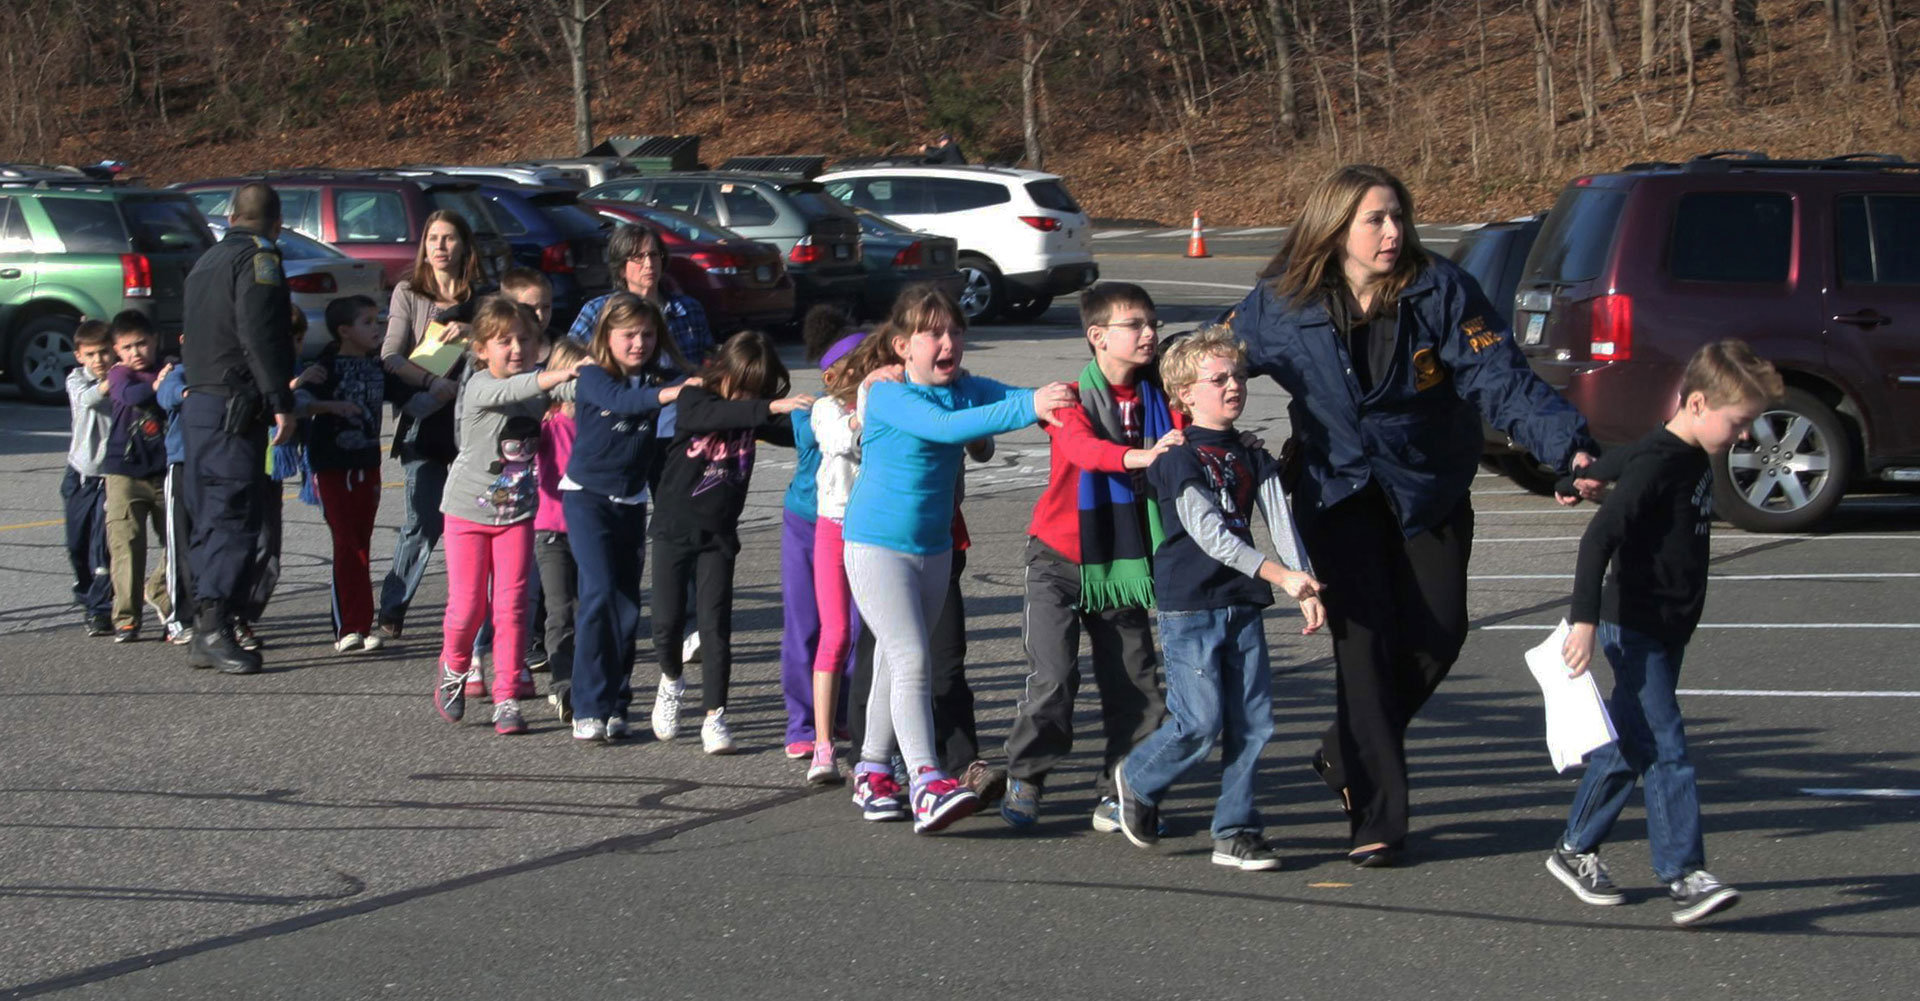 The children of Sandy Hook are escorted from the site of the school shooting. 2012